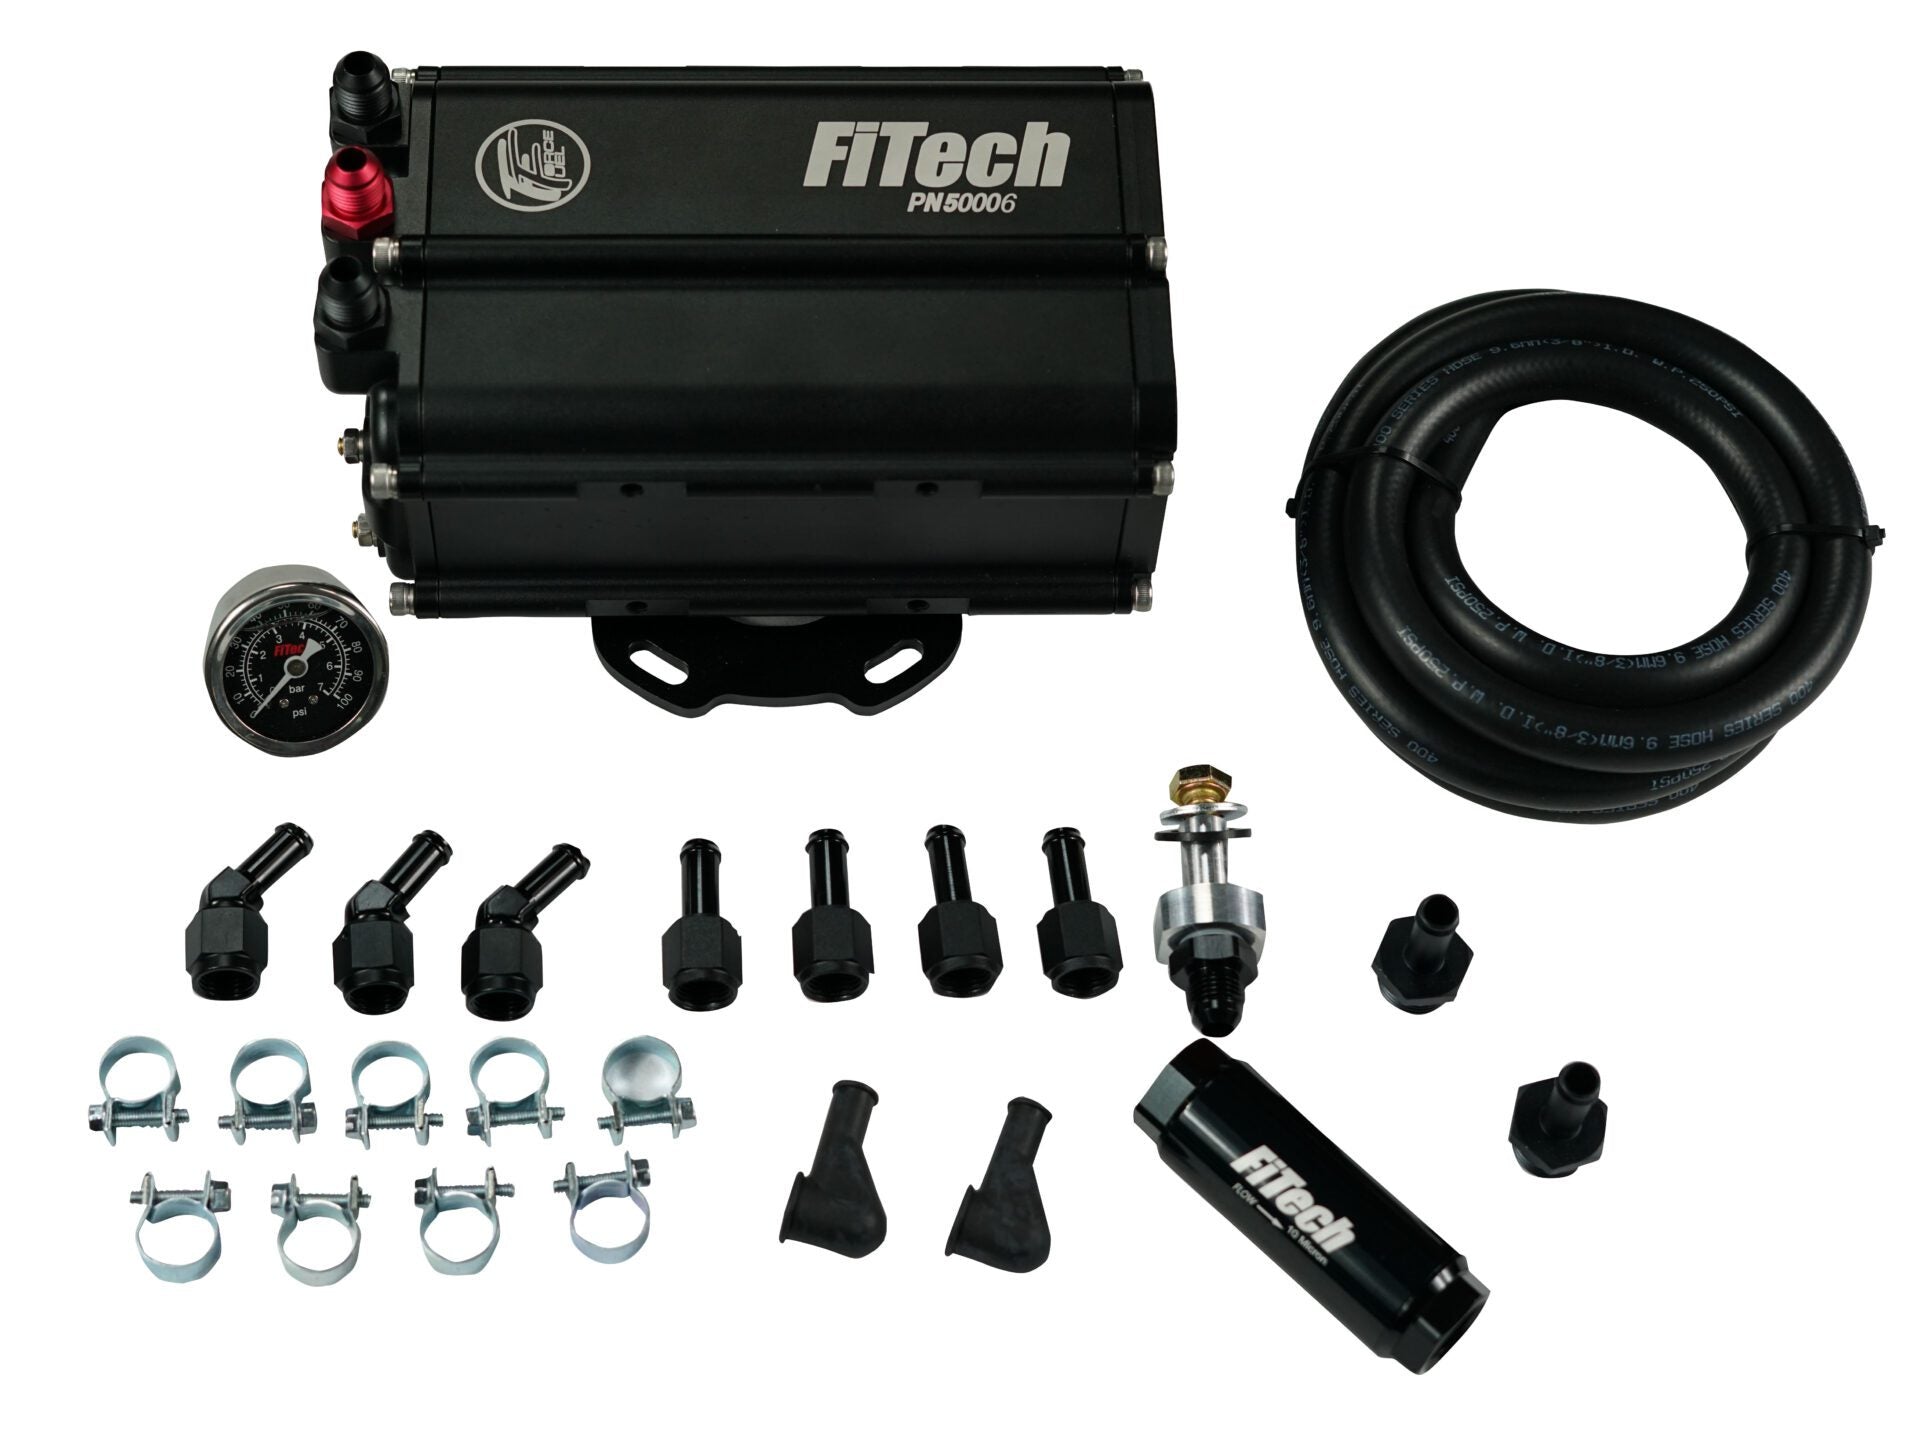 FiTech 93551 Go EFI 4 600 HP Bright Alum EFI System w/ Force Fuel Mini Delivery Master Kit